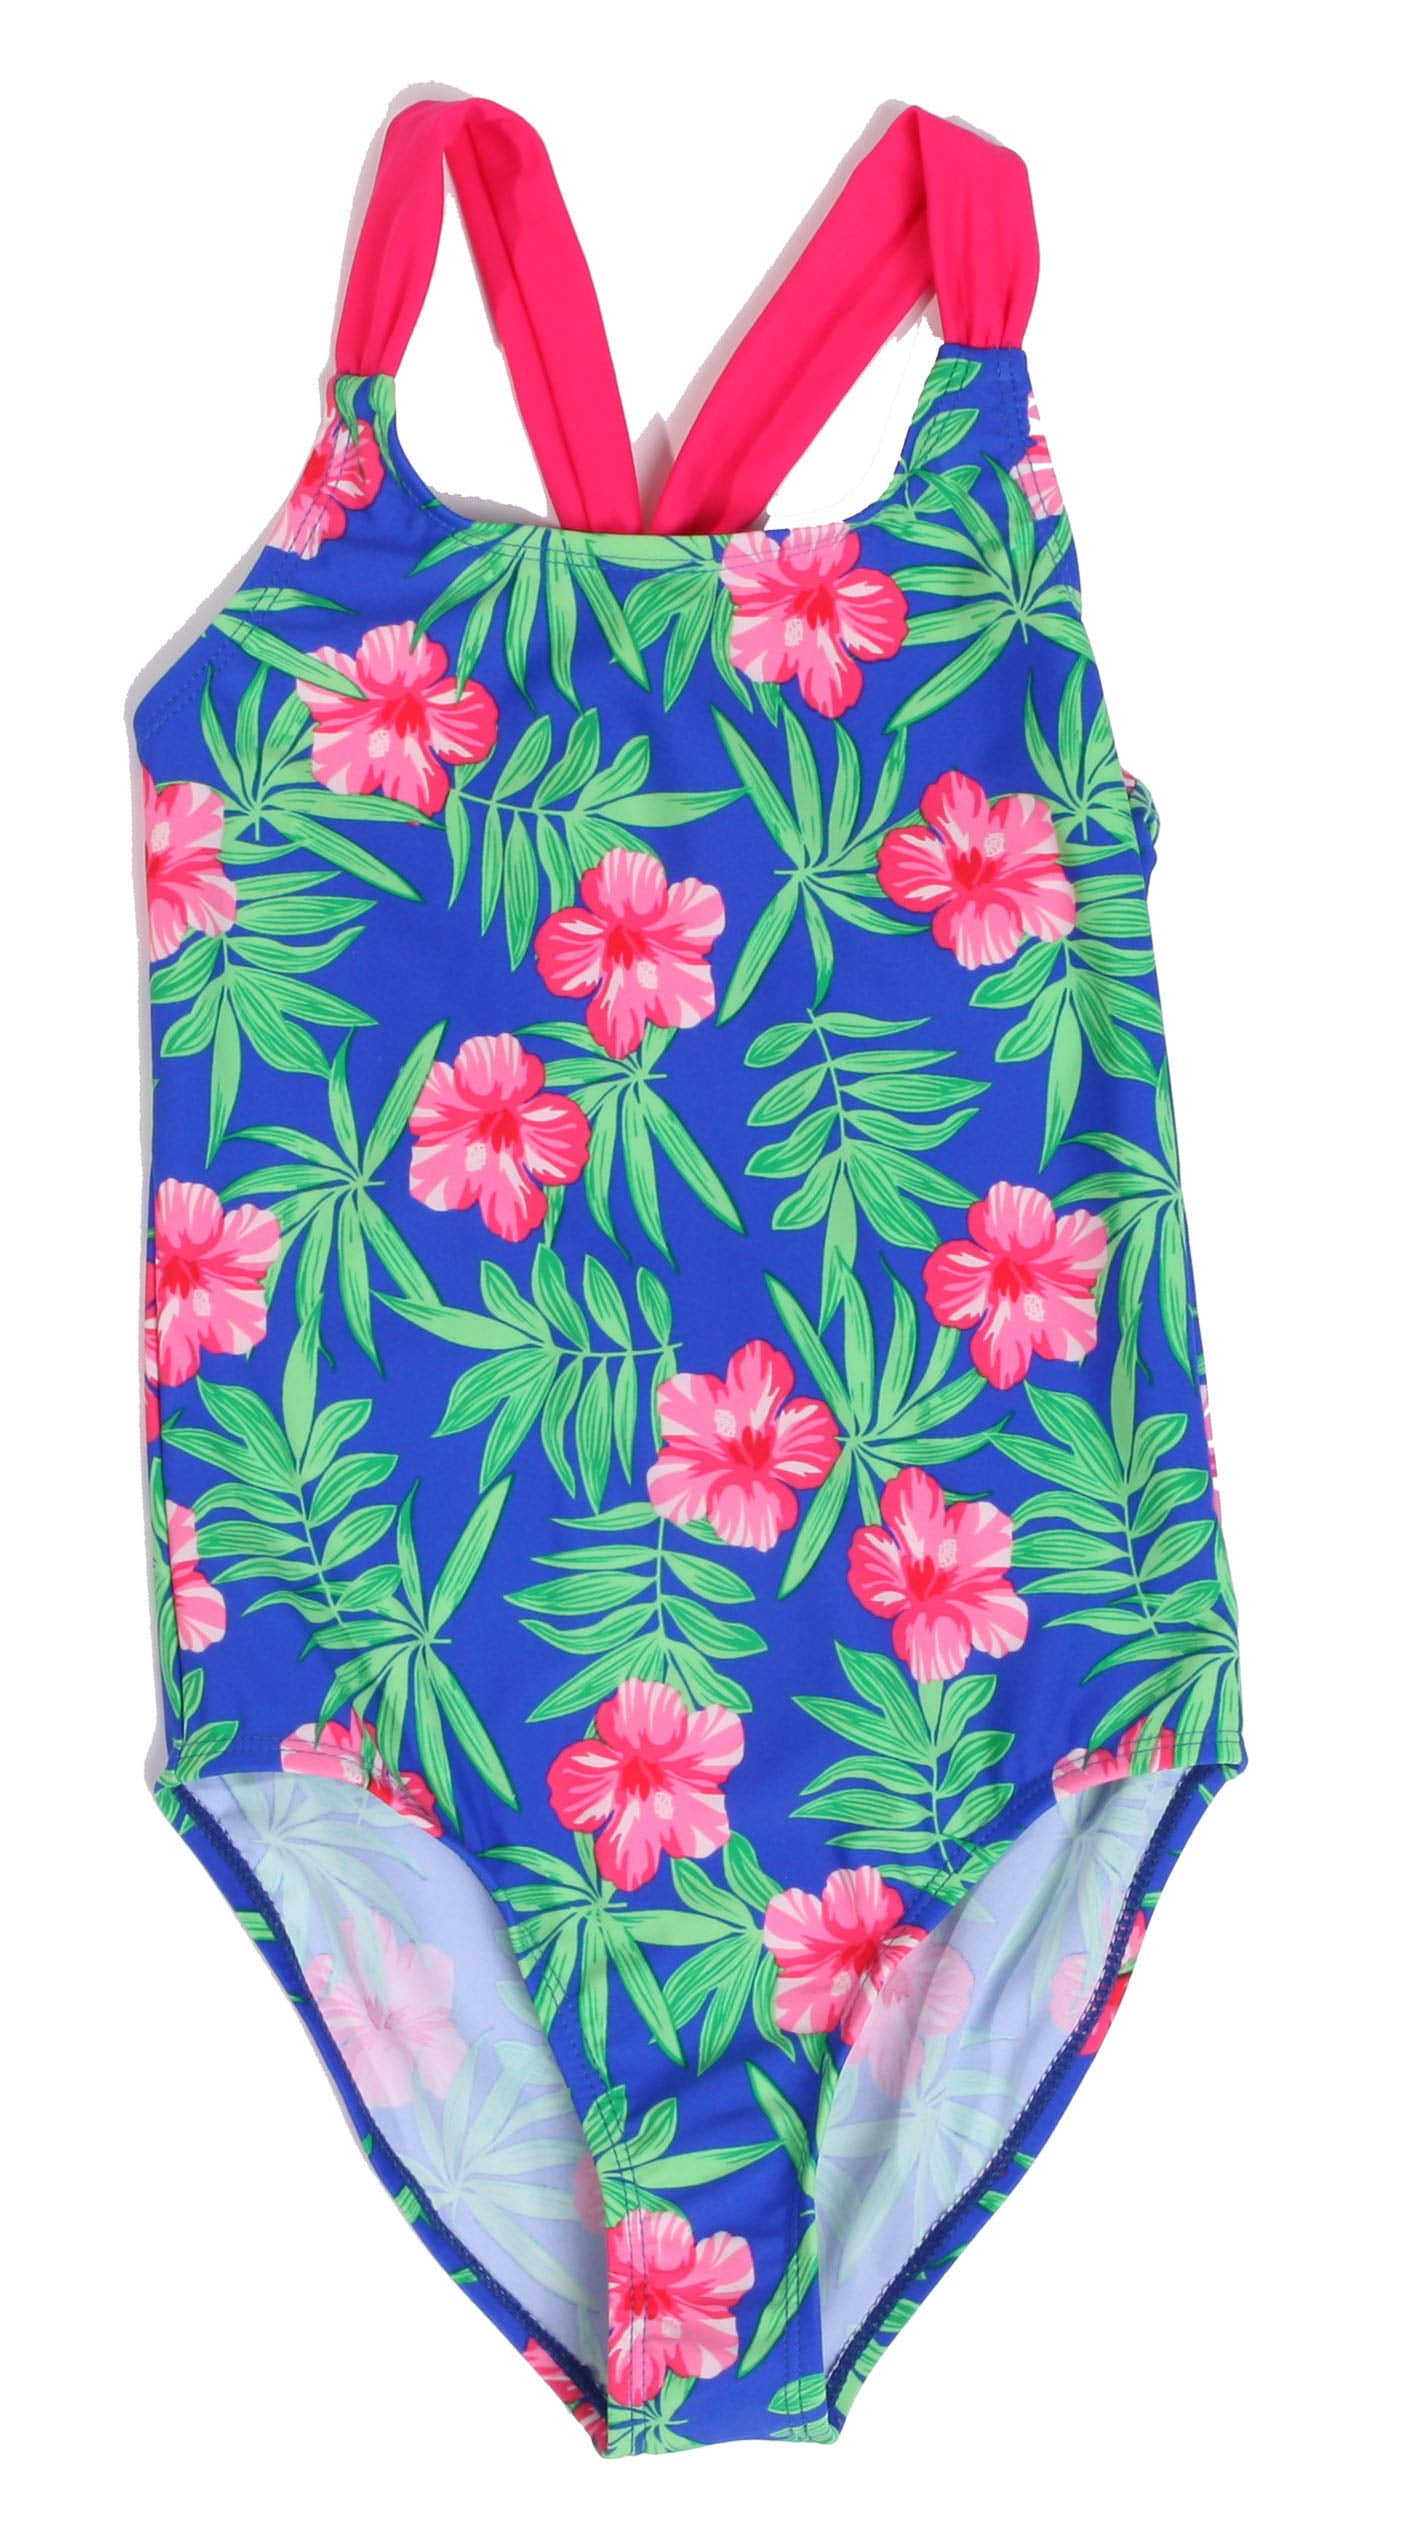 Just Love Girls' Racerback One-Piece Swimsuit with Upper Body Strap ...